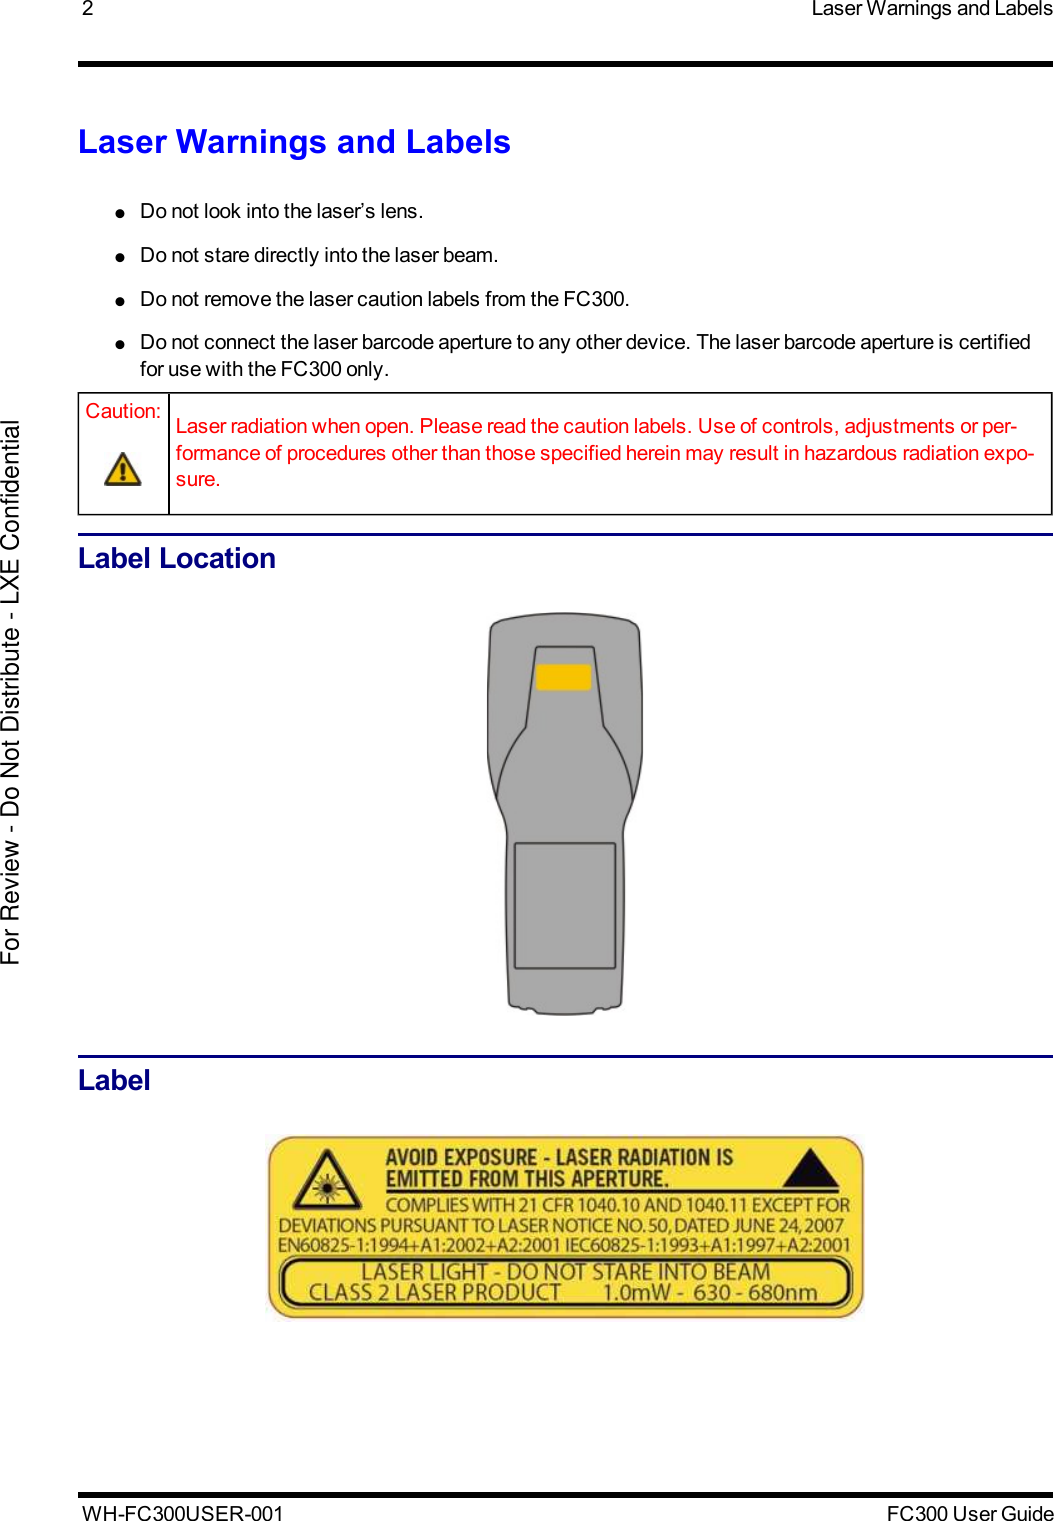 2 Laser Warnings and LabelsLaser Warnings and Labels●Do not look into the laser’s lens.●Do not stare directly into the laser beam.●Do not remove the laser caution labels from the FC300.●Do not connect the laser barcode aperture to any other device. The laser barcode aperture is certifiedfor use with the FC300 only.Caution: Laser radiation when open. Please read the caution labels. Use of controls, adjustments or per-formance of procedures other than those specified herein may result in hazardous radiation expo-sure.Label LocationLabelWH-FC300USER-001 FC300 User GuideFor Review - Do Not Distribute - LXE Confidential